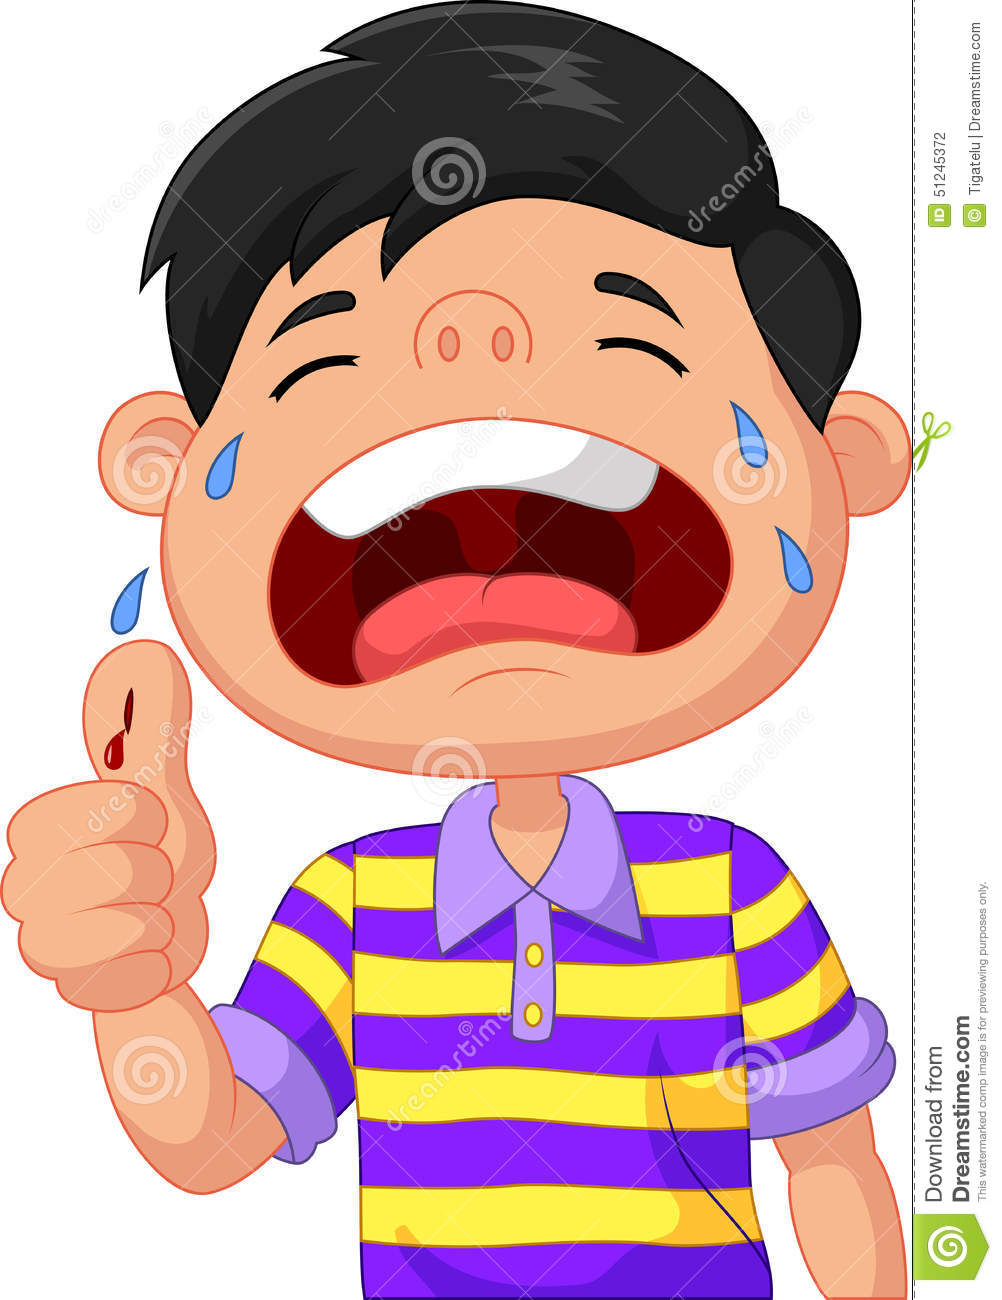 Cartoon Boy Crying Because Of A Cut On His Thumb Stock Vector   Image